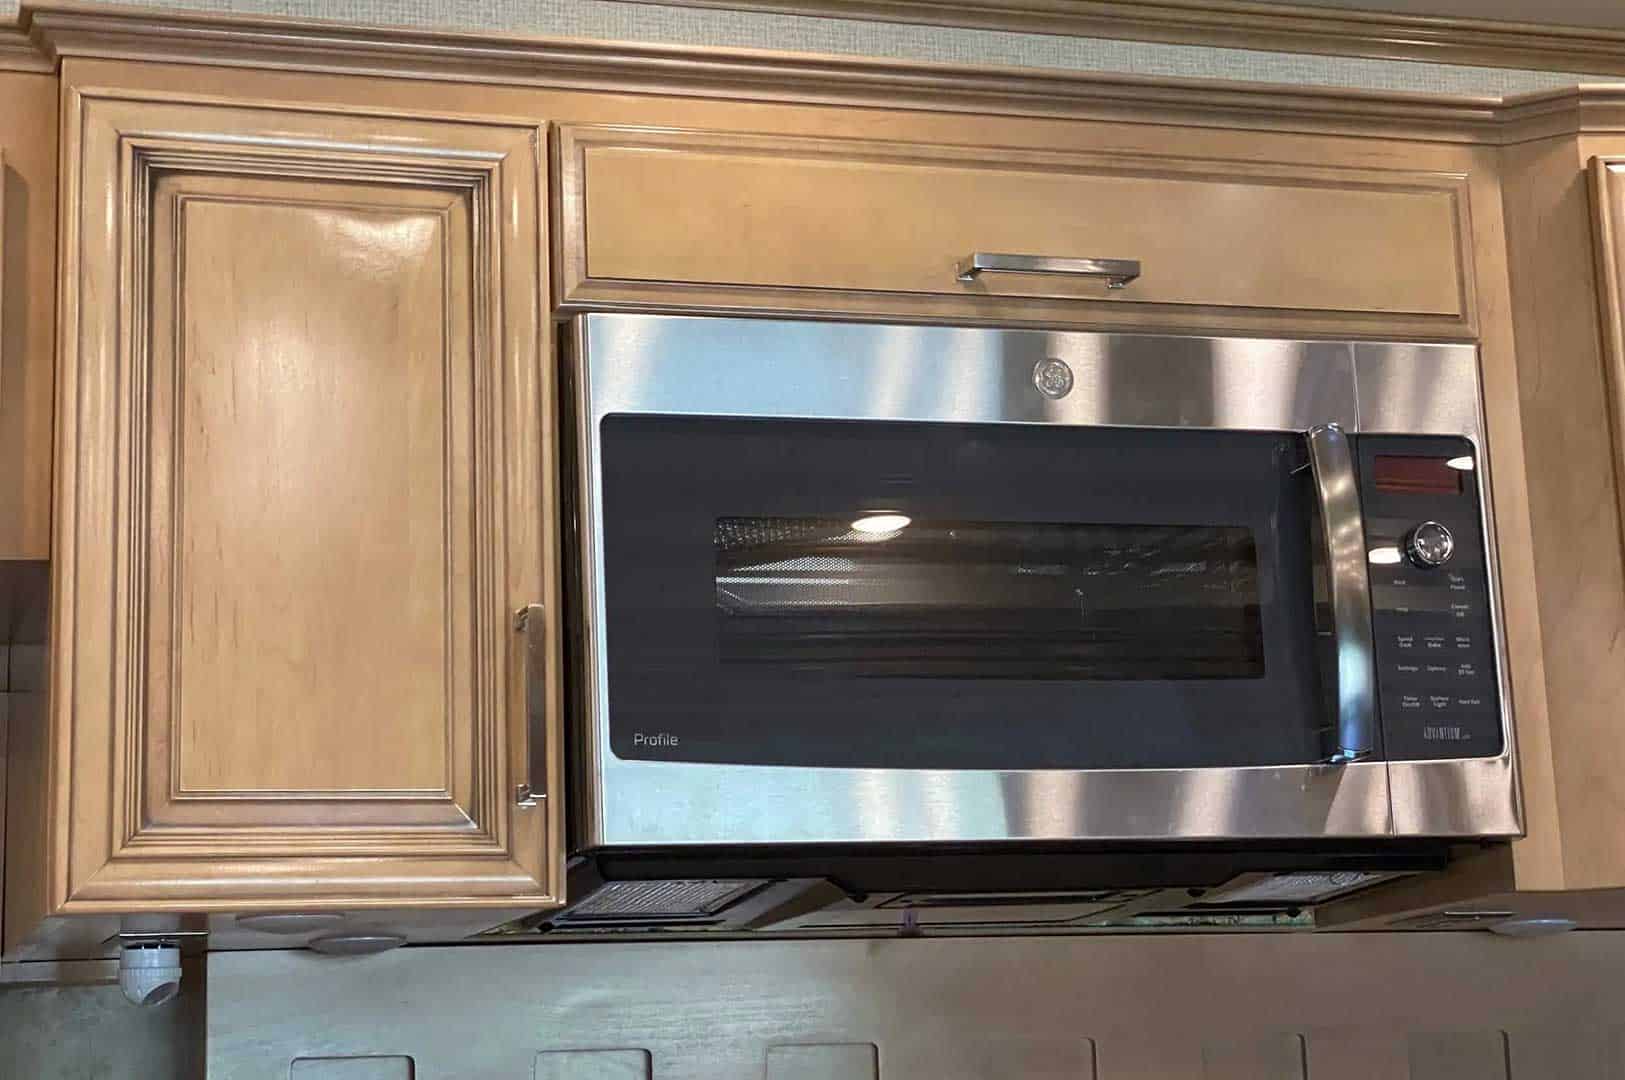 RV microwave convection oven